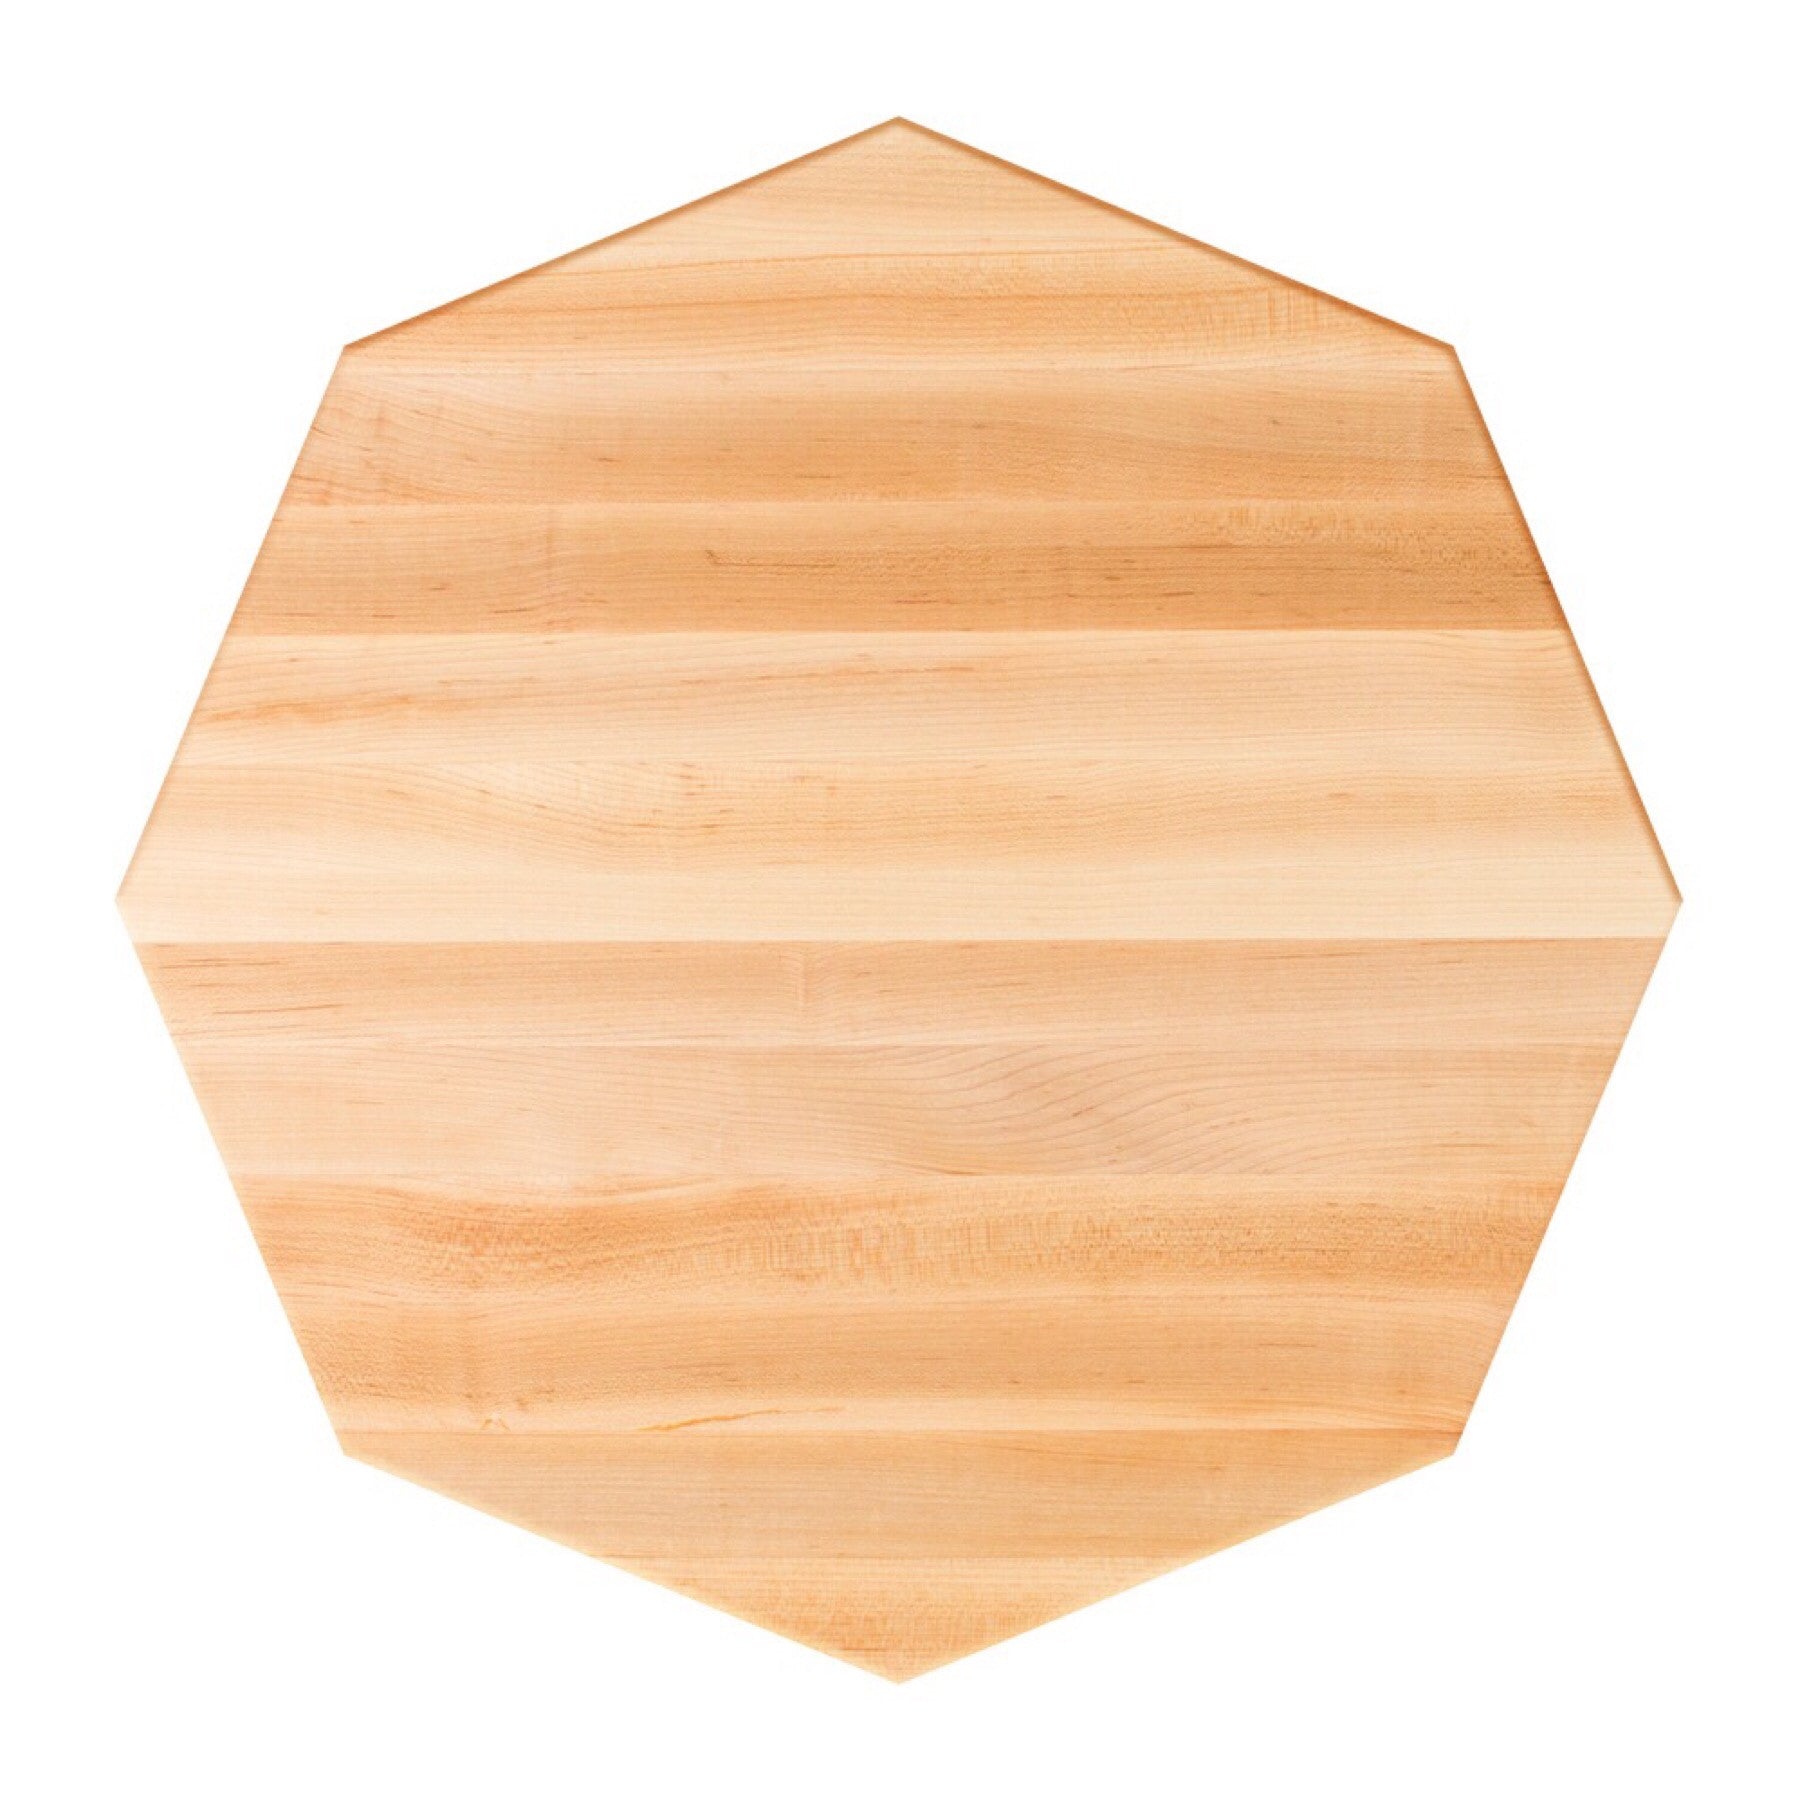 John Boos Octagonal RTSM Soft Maple Butcher Block Table Top - Stainable